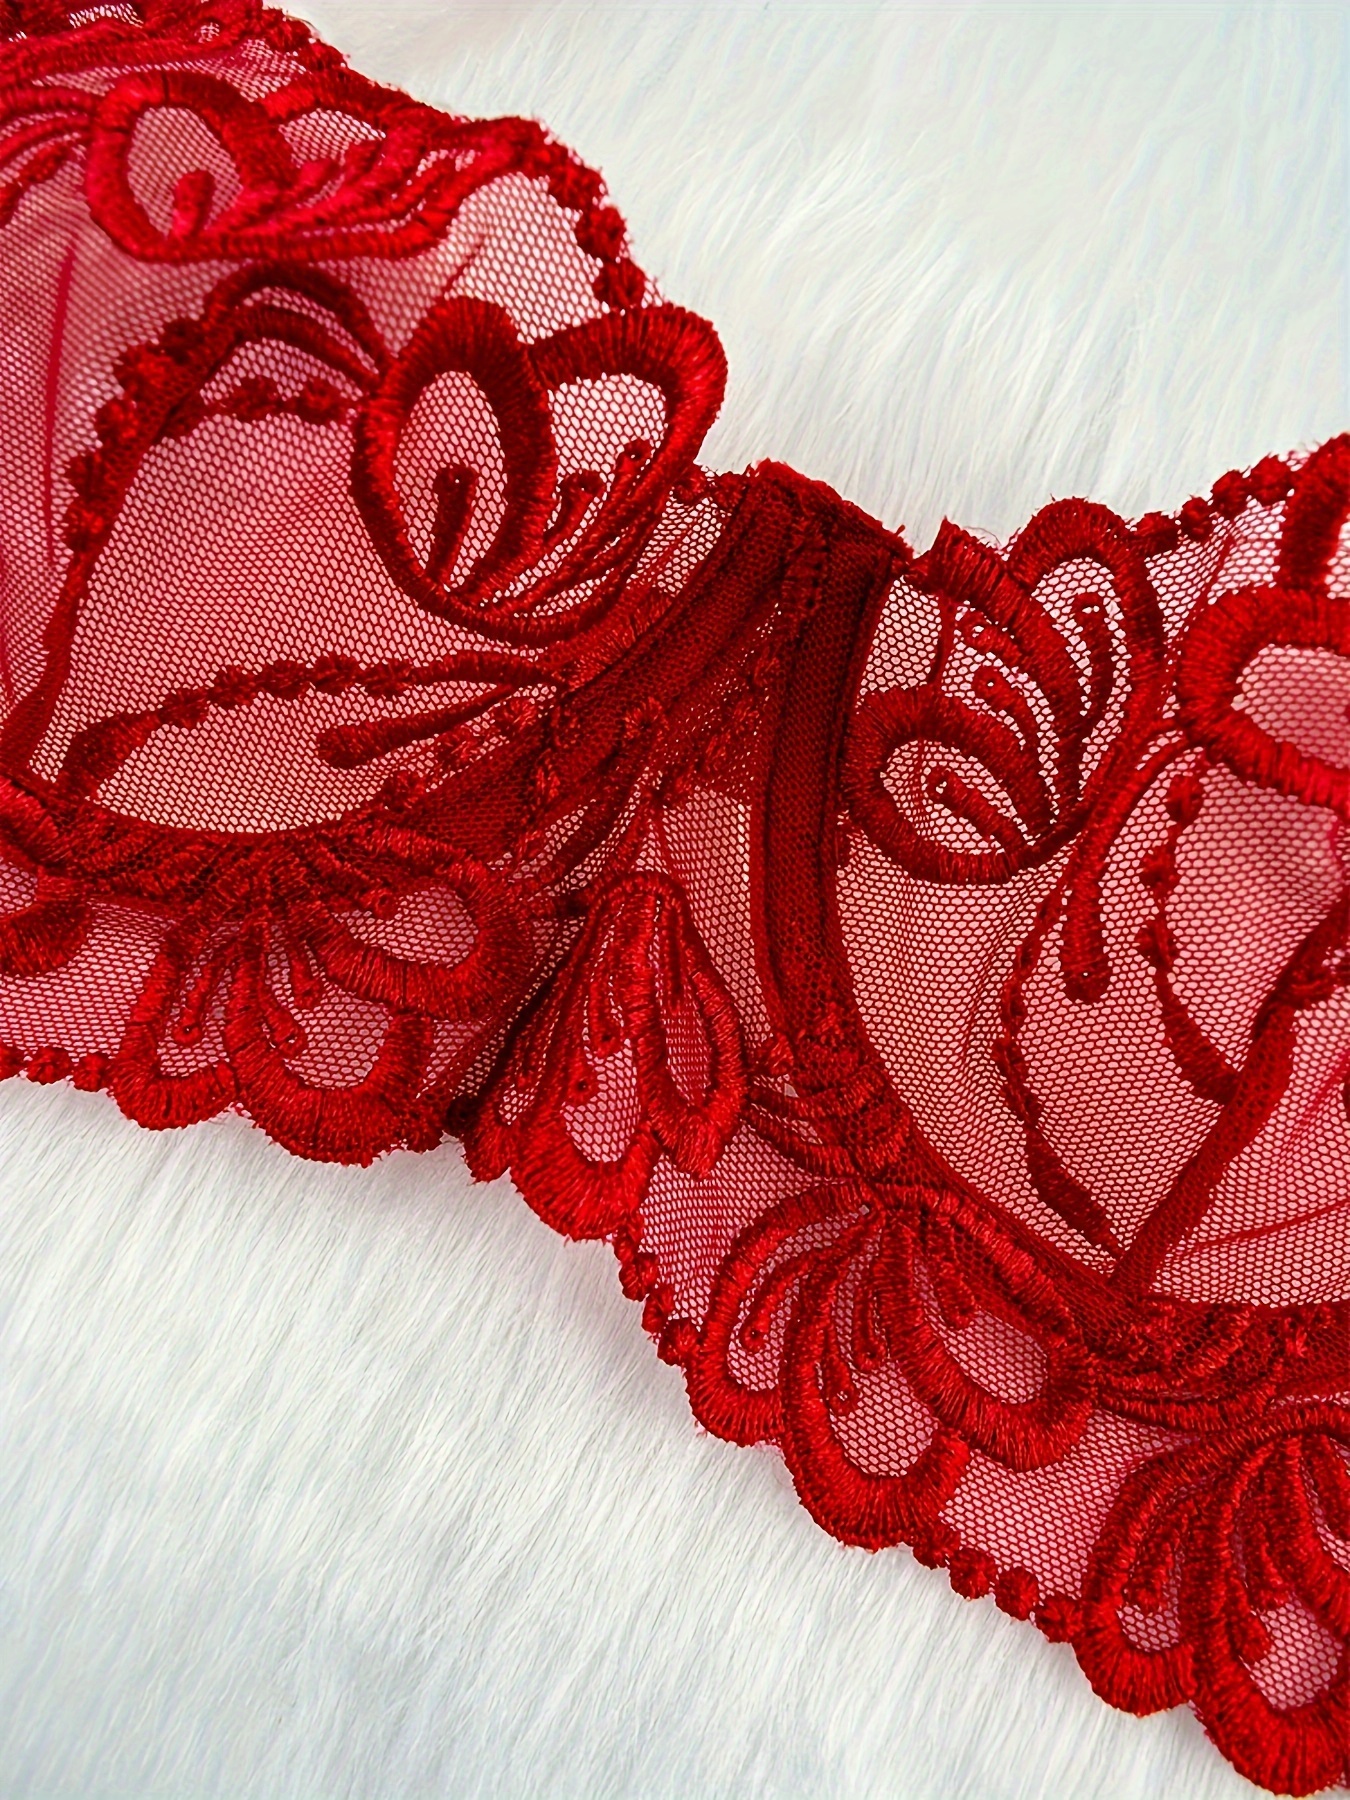 Women's Red Lace Lingerie Mesh Sexy Intimate Set – KesleyBoutique